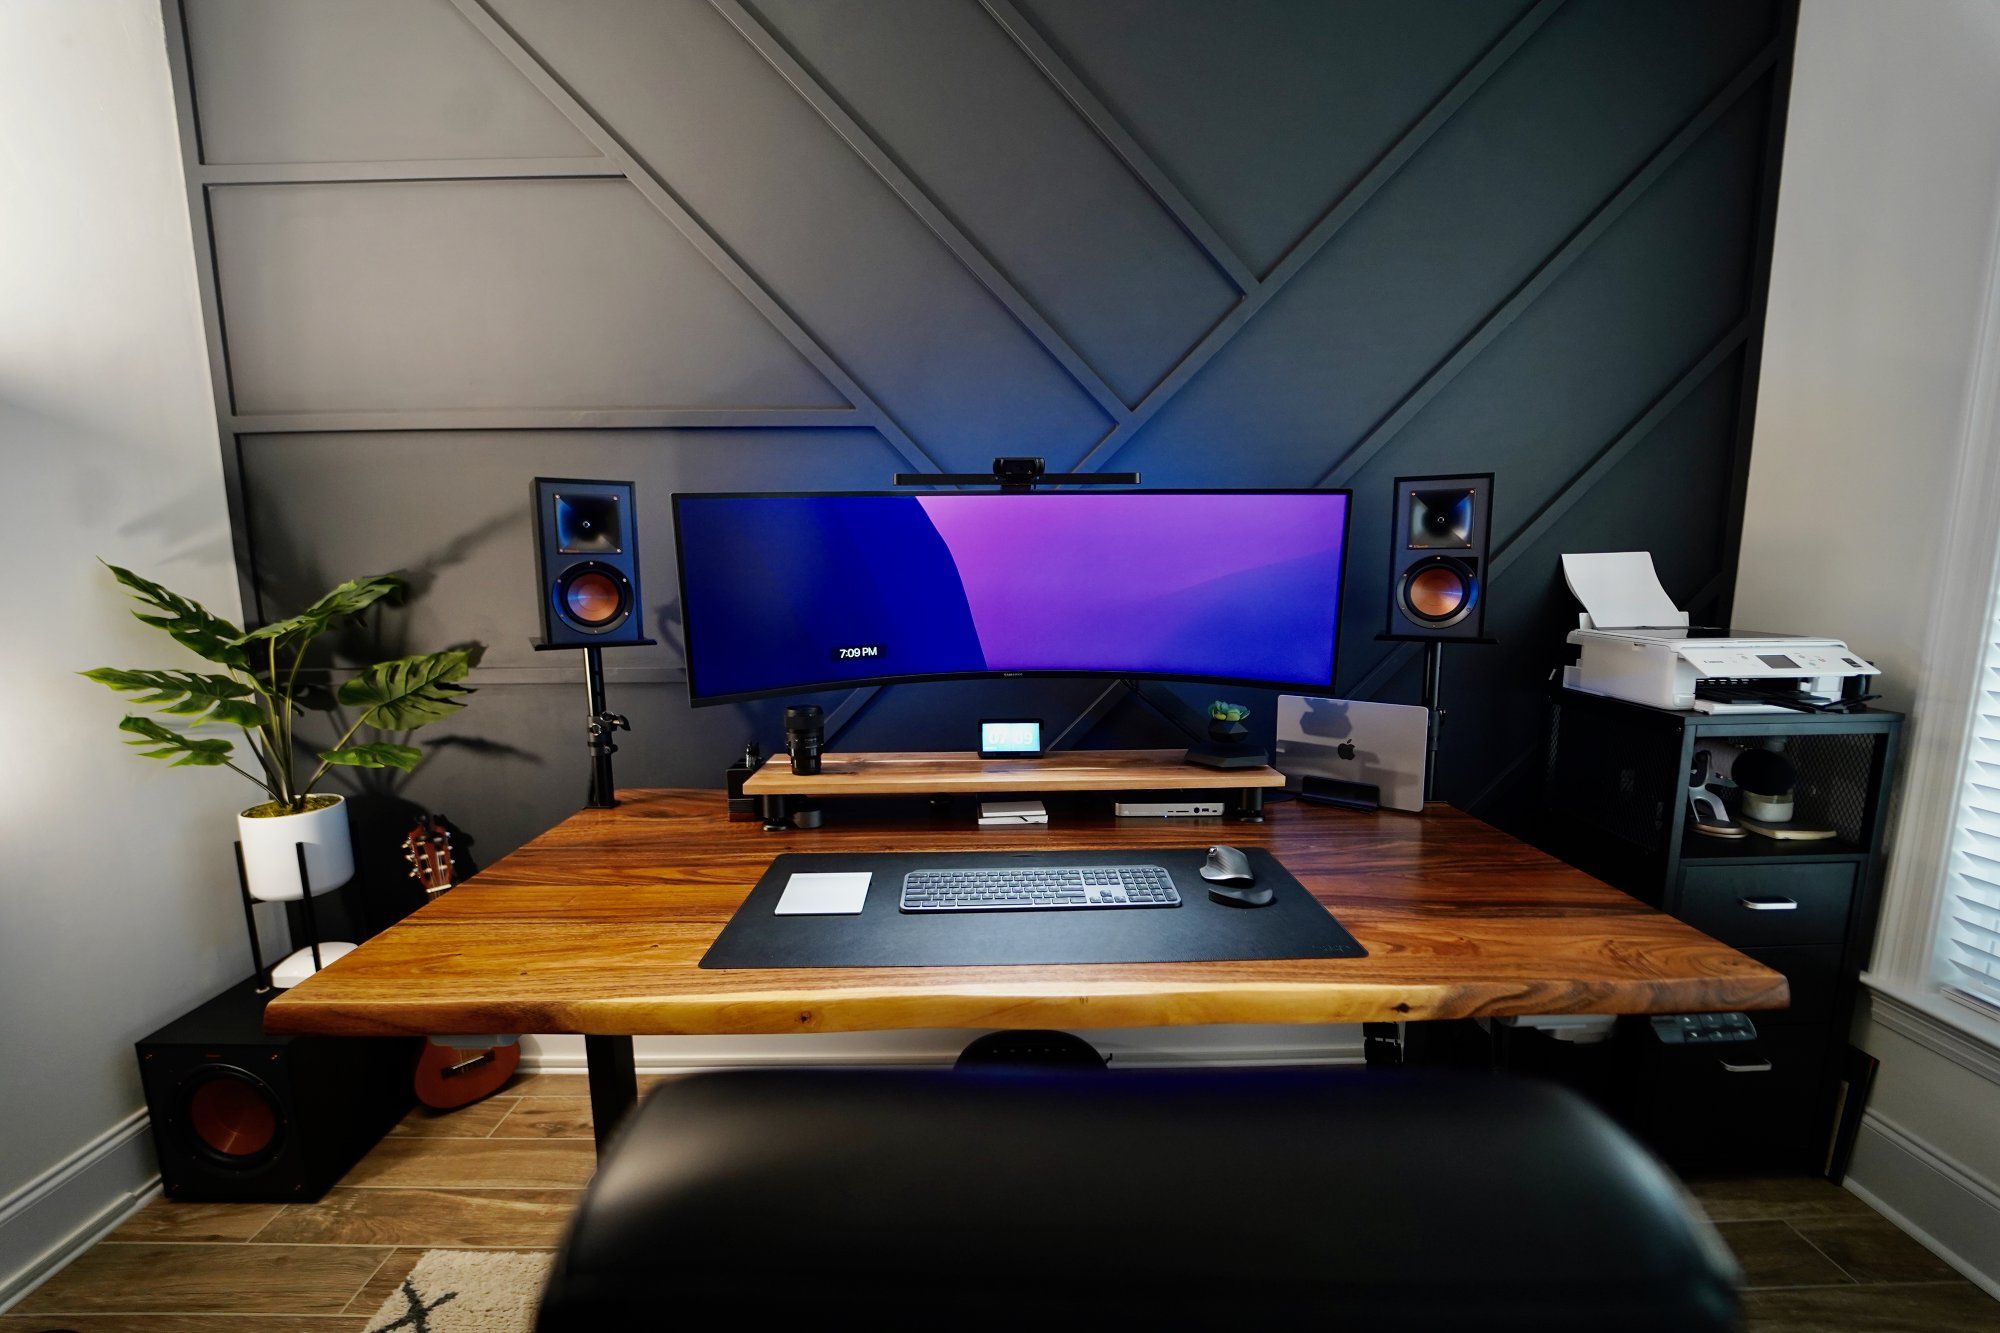 A spacious desk setup with a super ultrawide Samsung Odyssey monitor, Klipsch speakers, and a potted plant